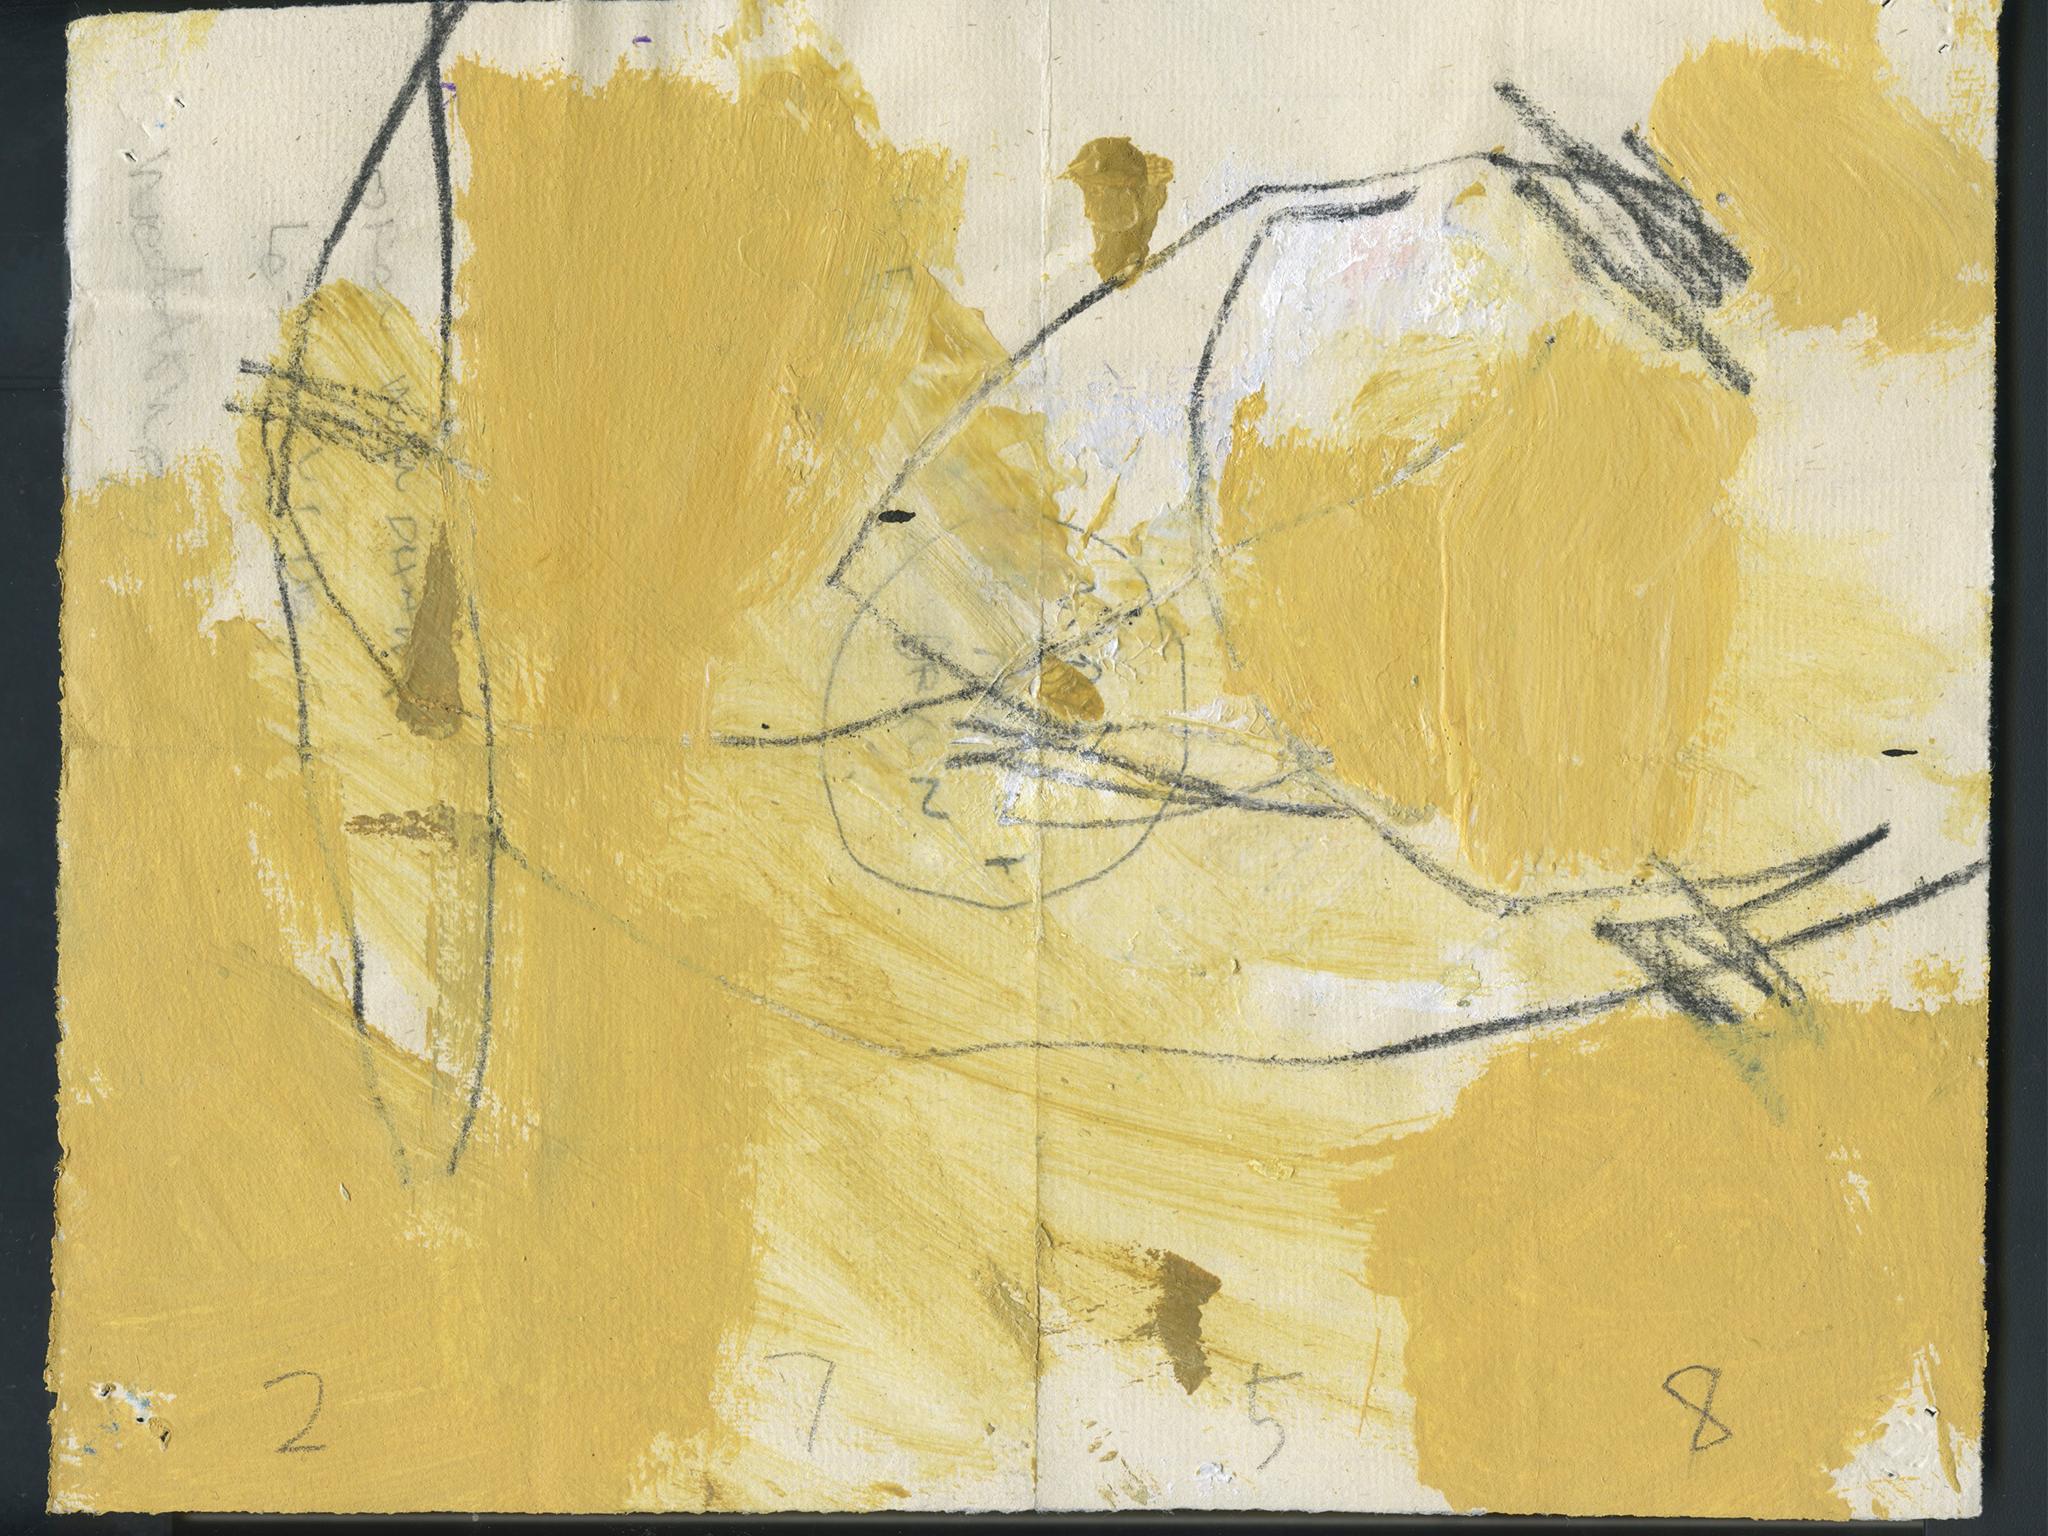 An energetic, richly hued abstract work on paper by the artist M.P. Landis. The artist's abstract paintings and works on paper are the type that take form through the artist's layering of materials. This drawing is from the artist's series